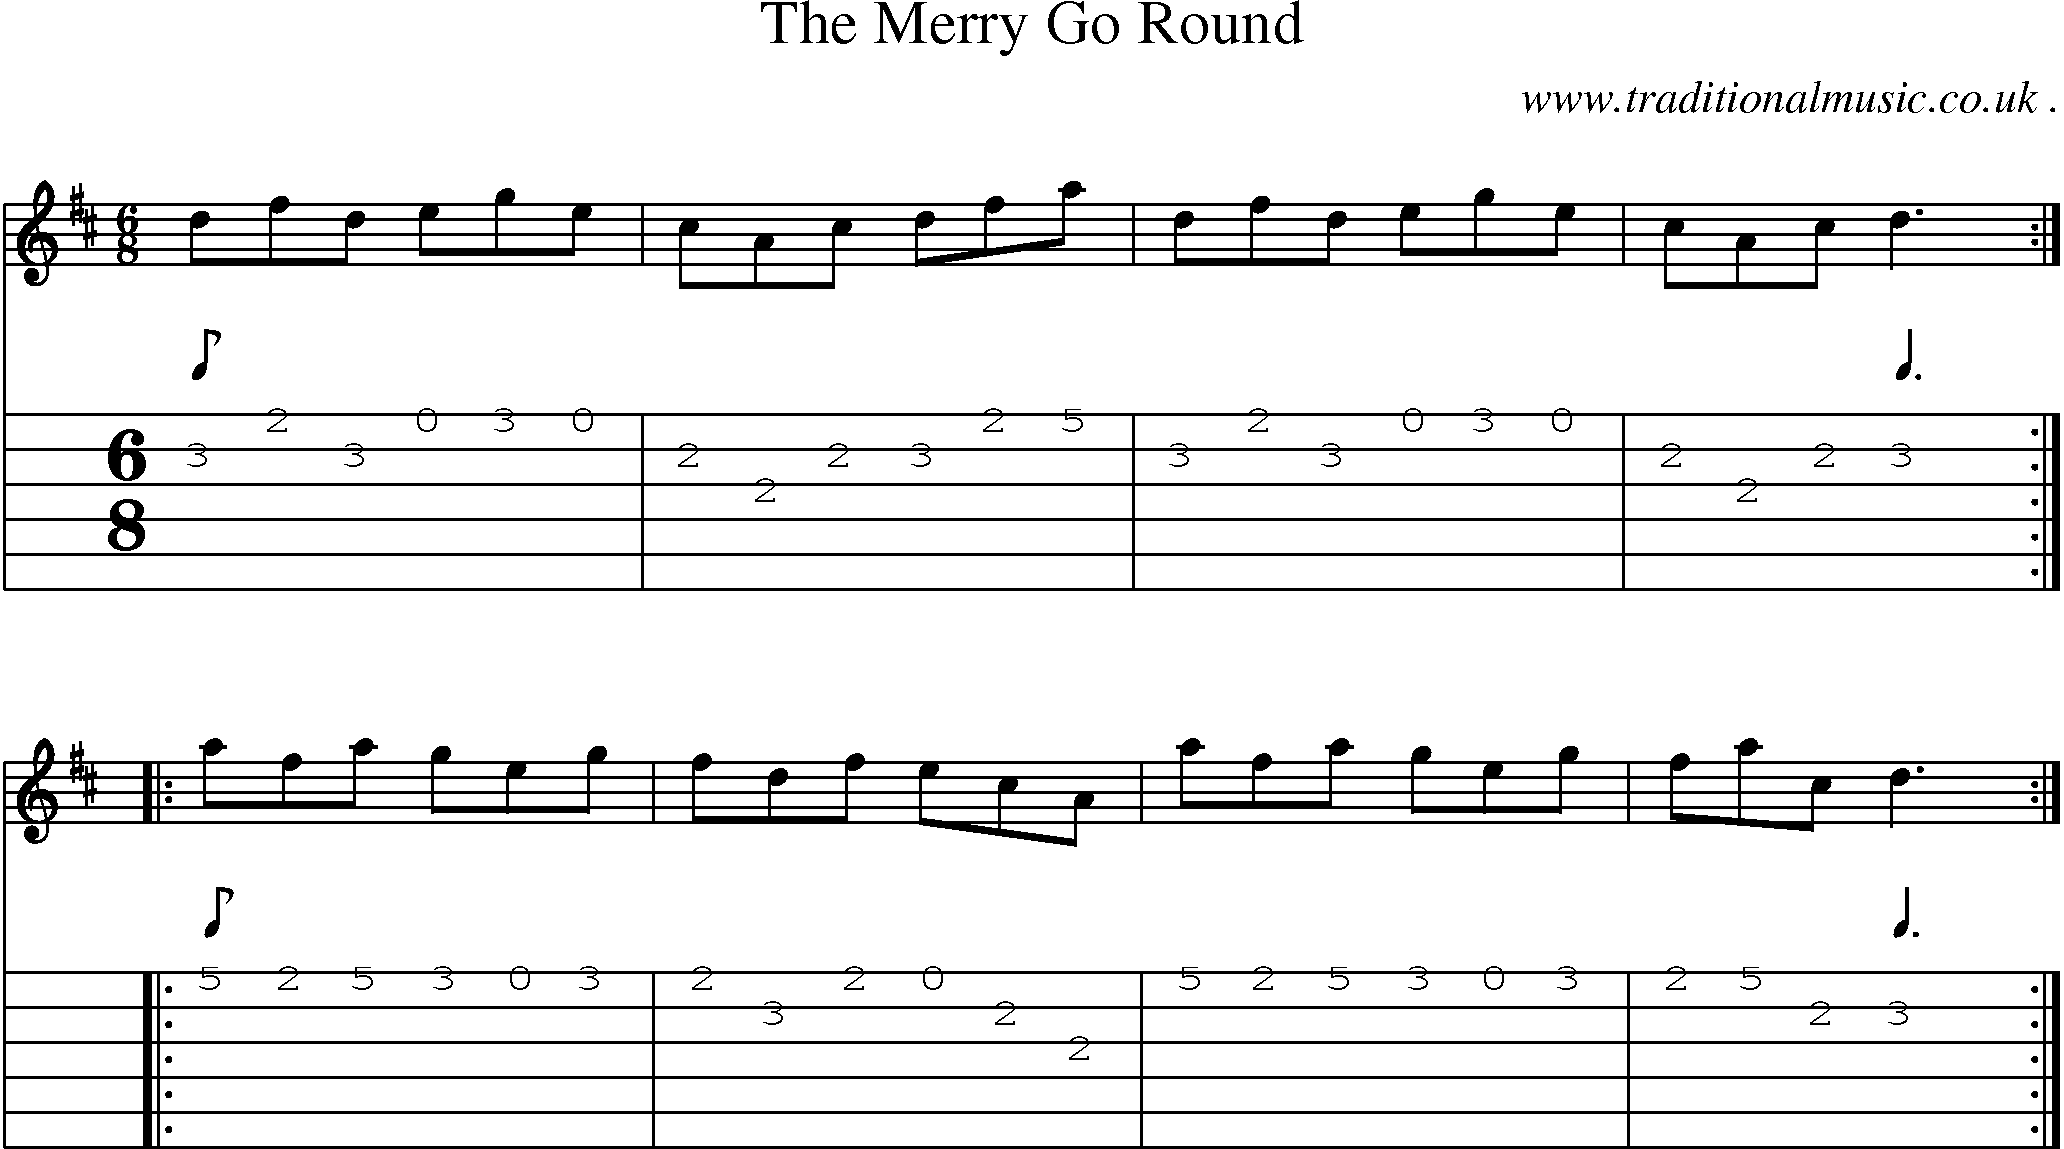 Sheet-Music and Guitar Tabs for The Merry Go Round